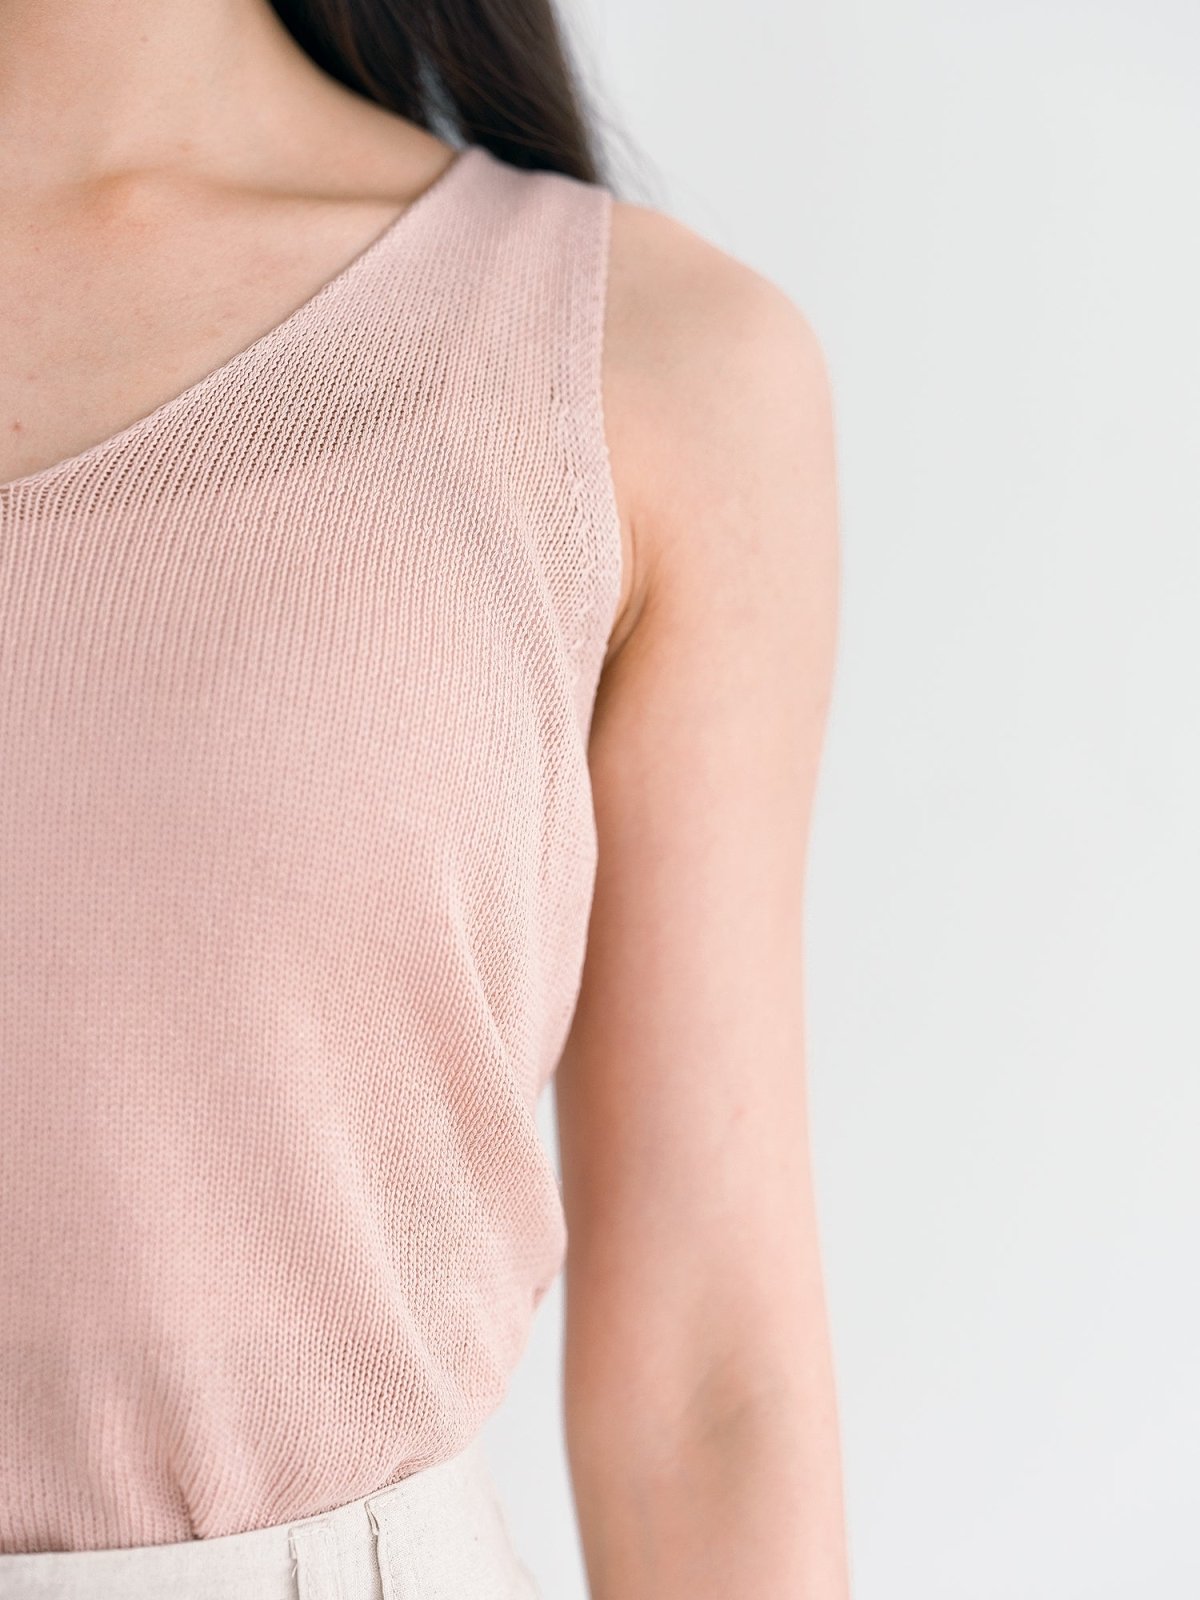 Brook [Extra Comfy] Sleeveless Knit Top - DAG-G-220175PinkF - Pink - F - D'ZAGE Designs